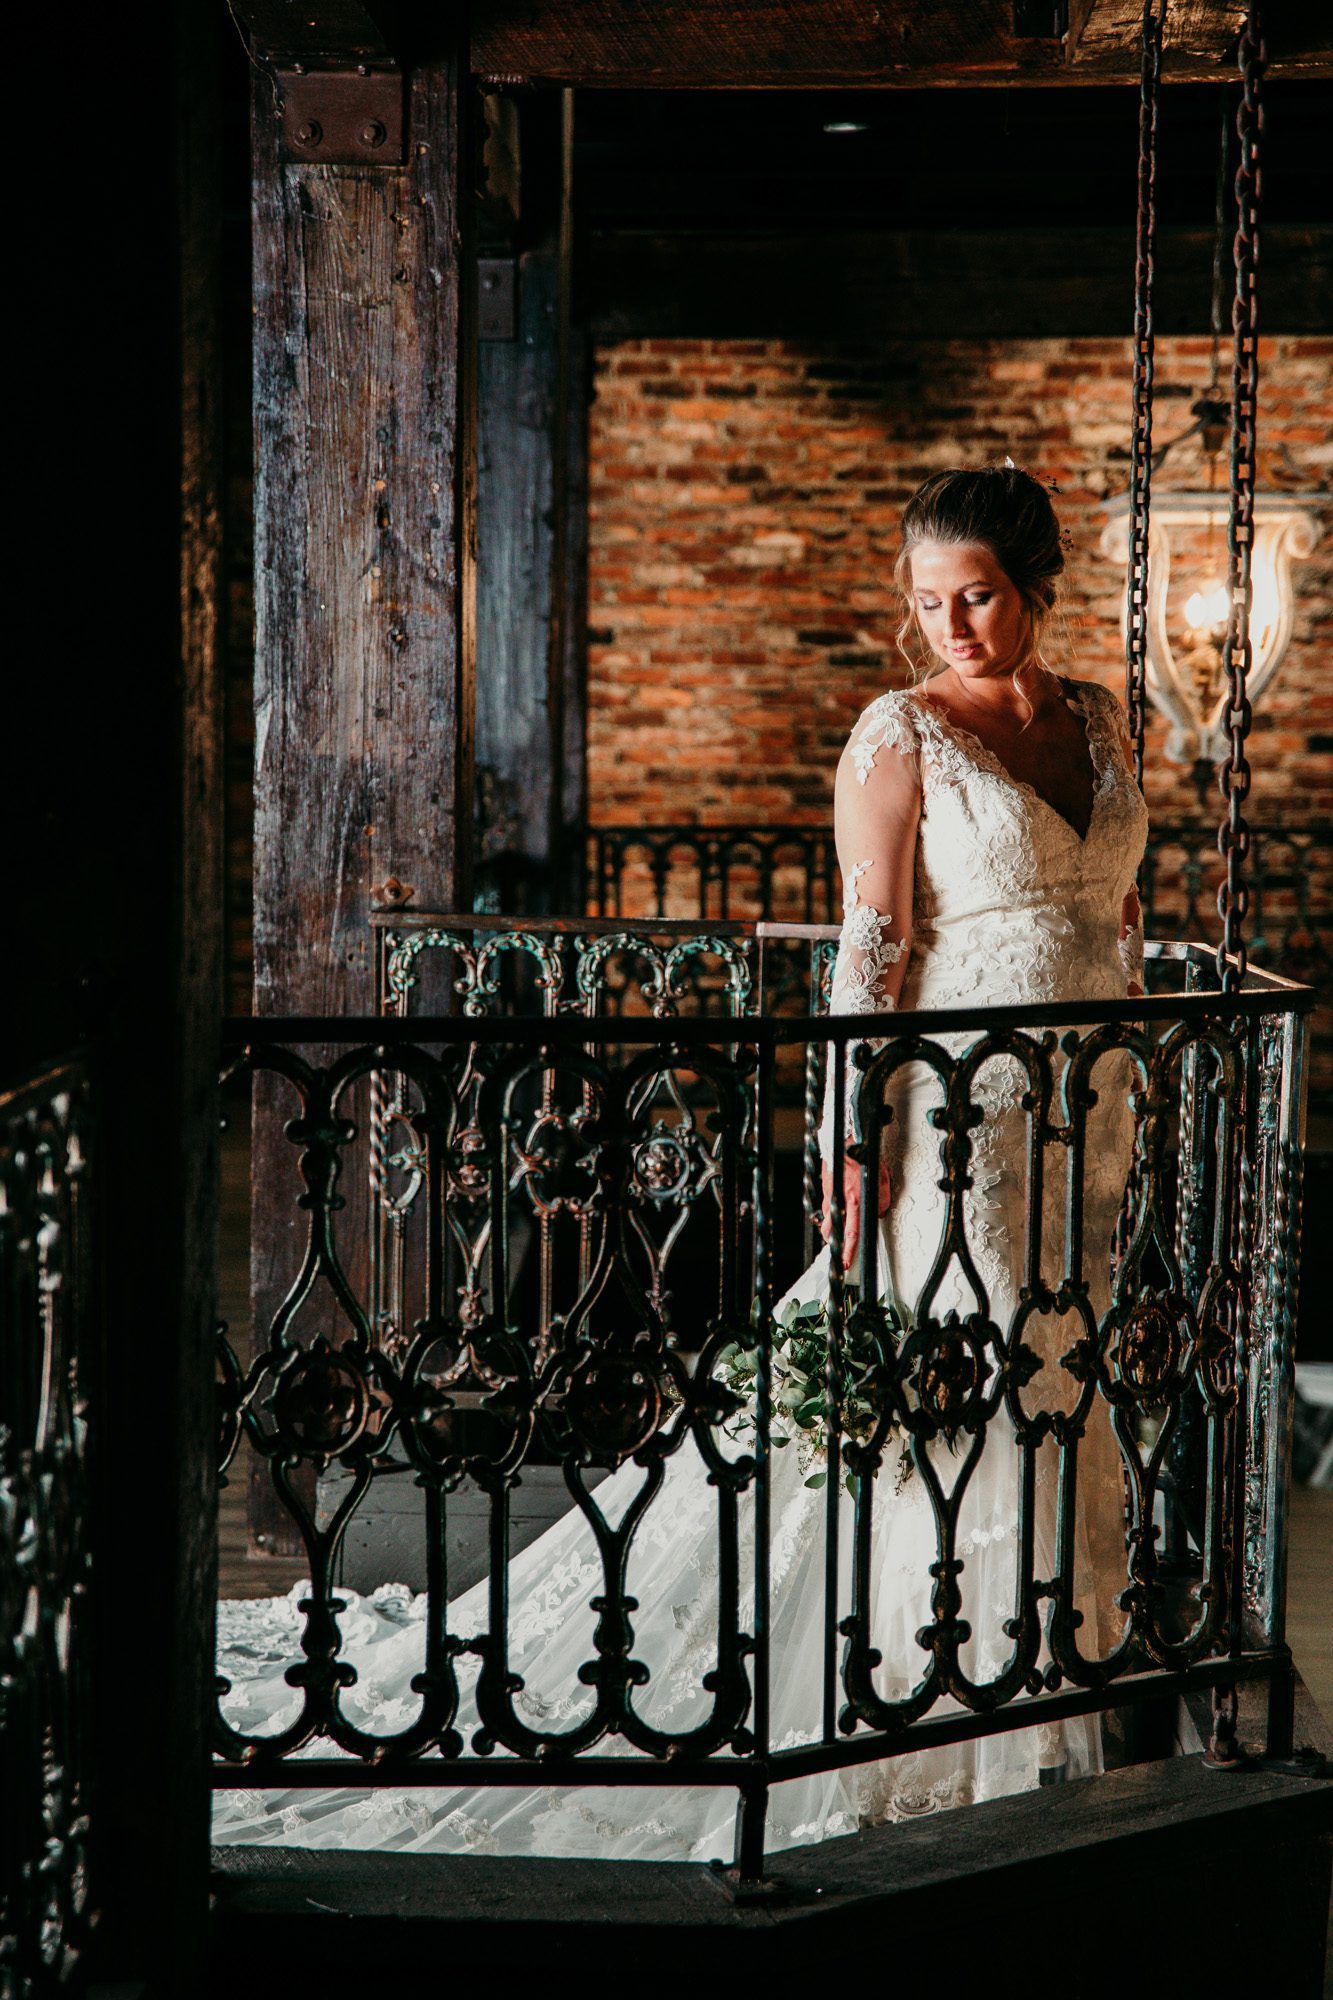 Bride inside a vintage brick building old world charm at the Bedford event and wedding venue in Nashville TN. Photo by Krista Lee Photography